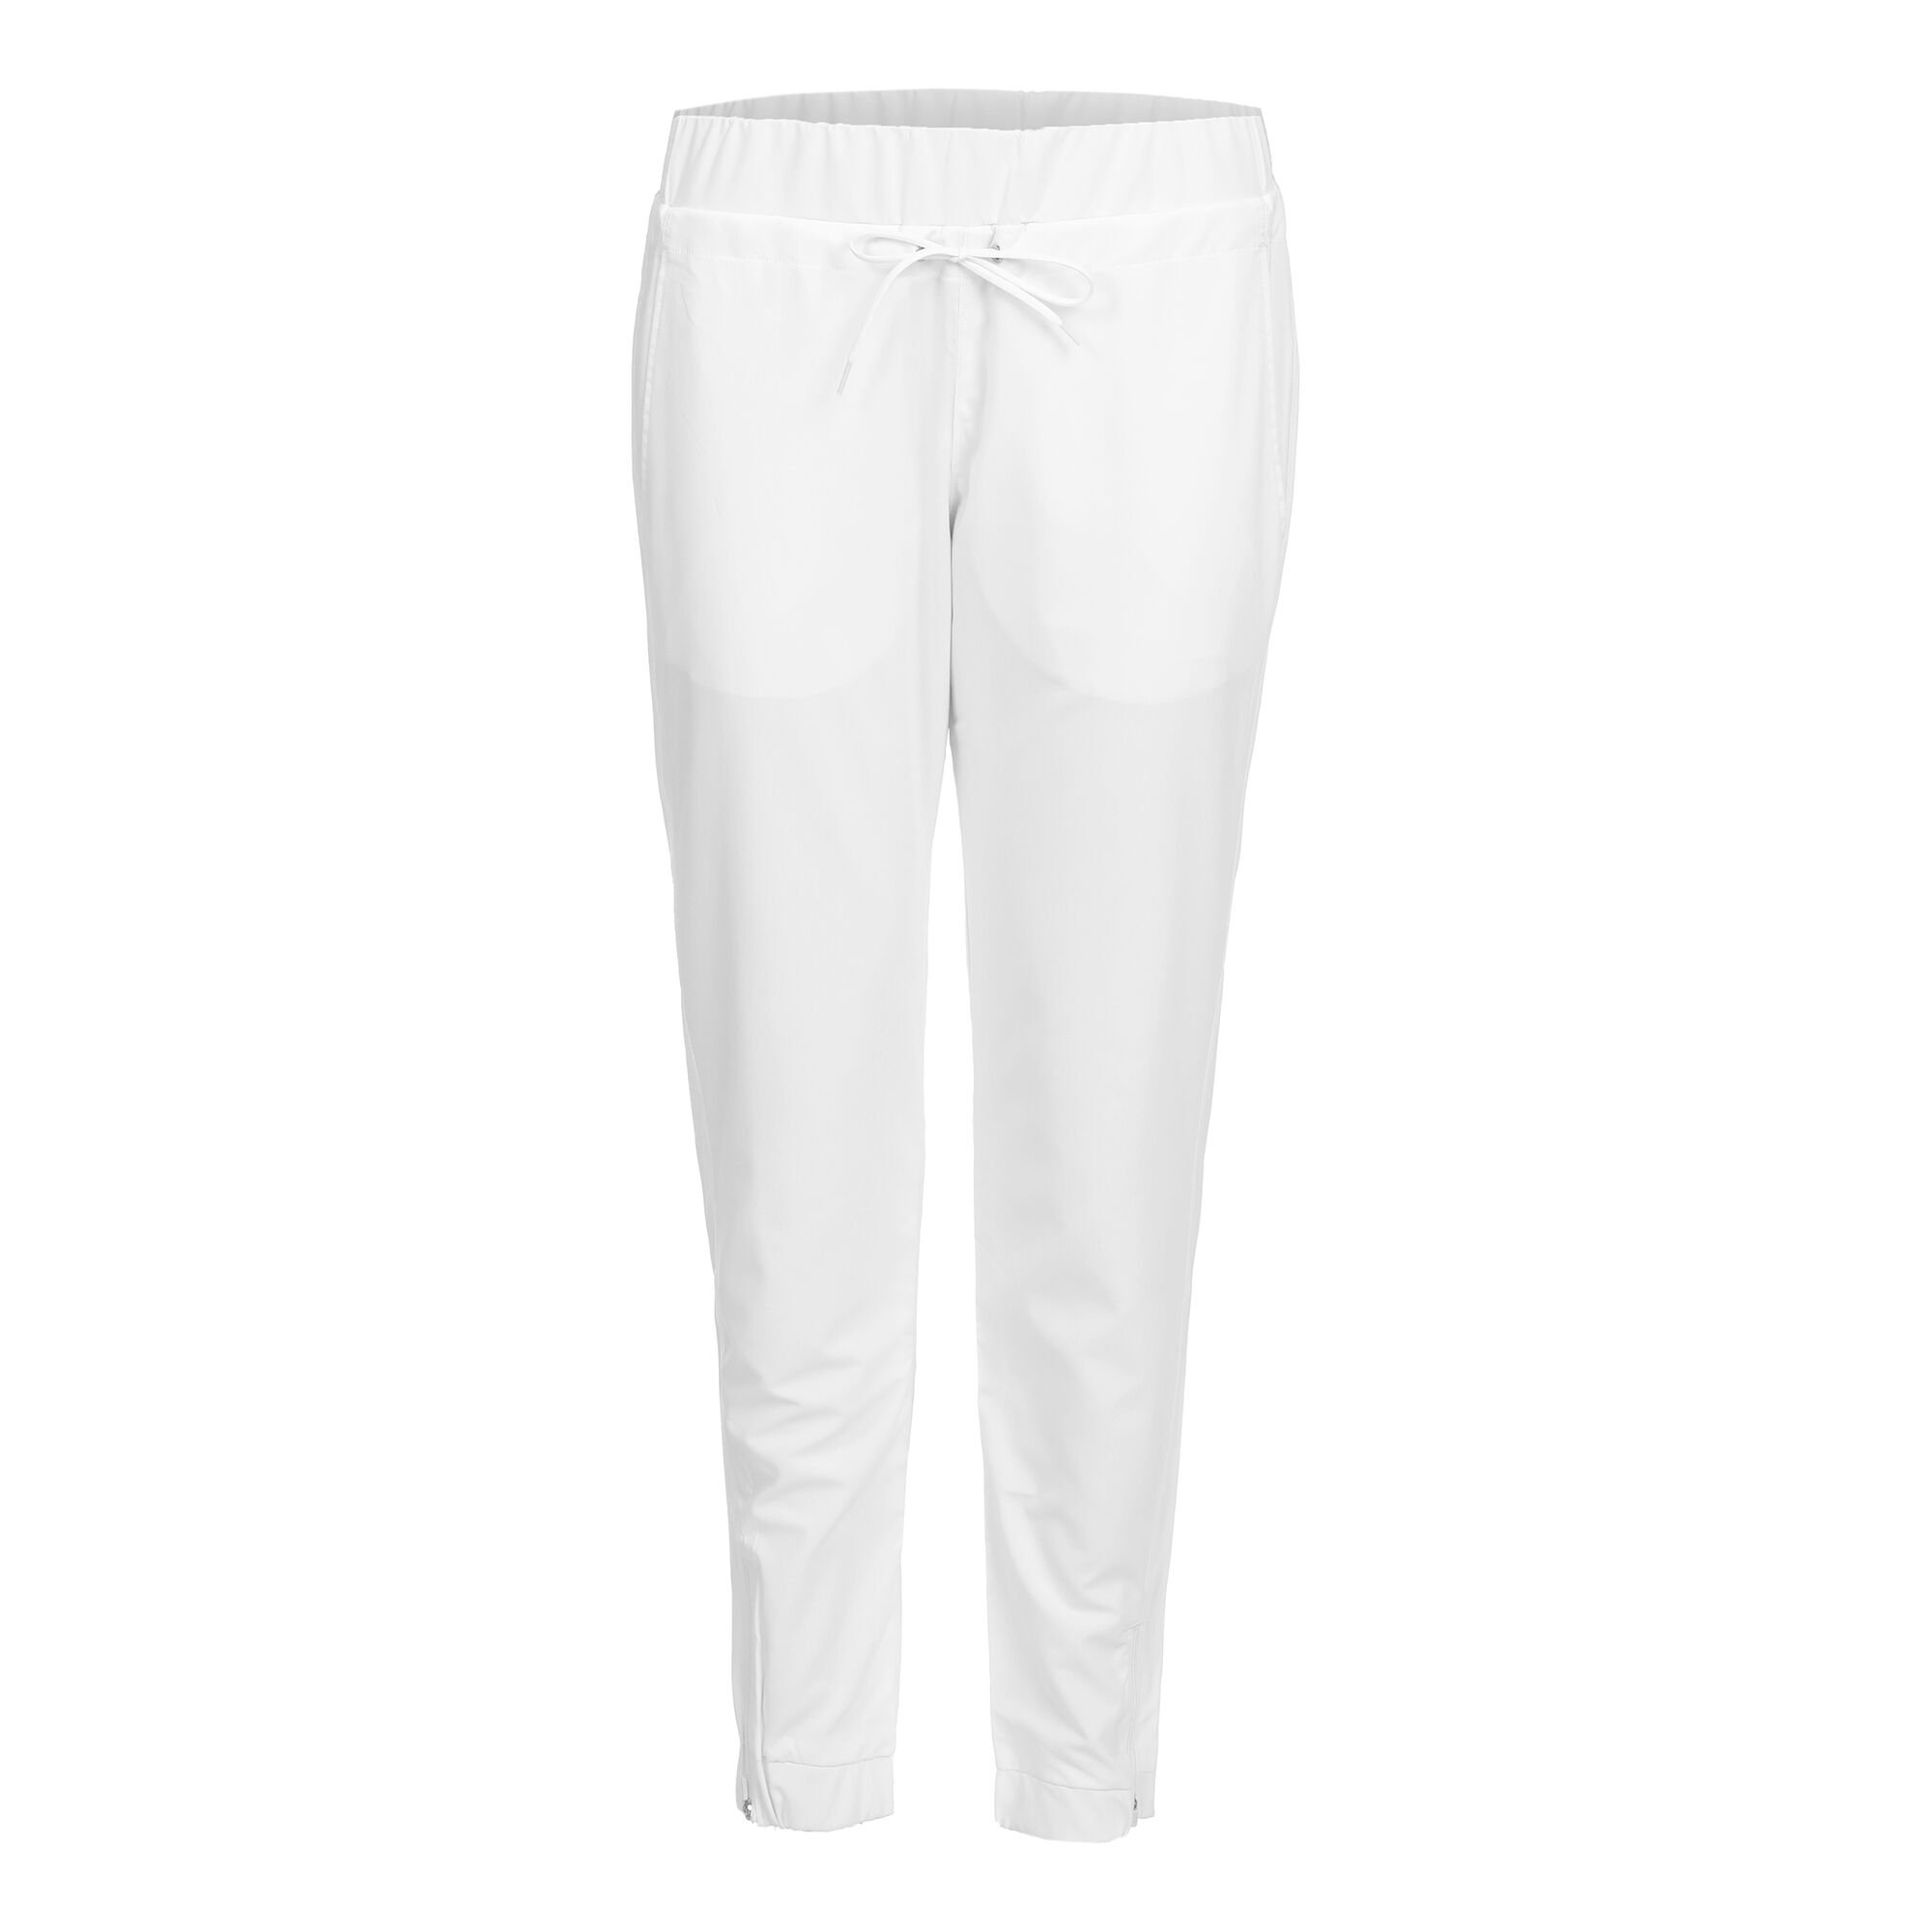 Buy Limited Sports Pulie Training Pants Women White online